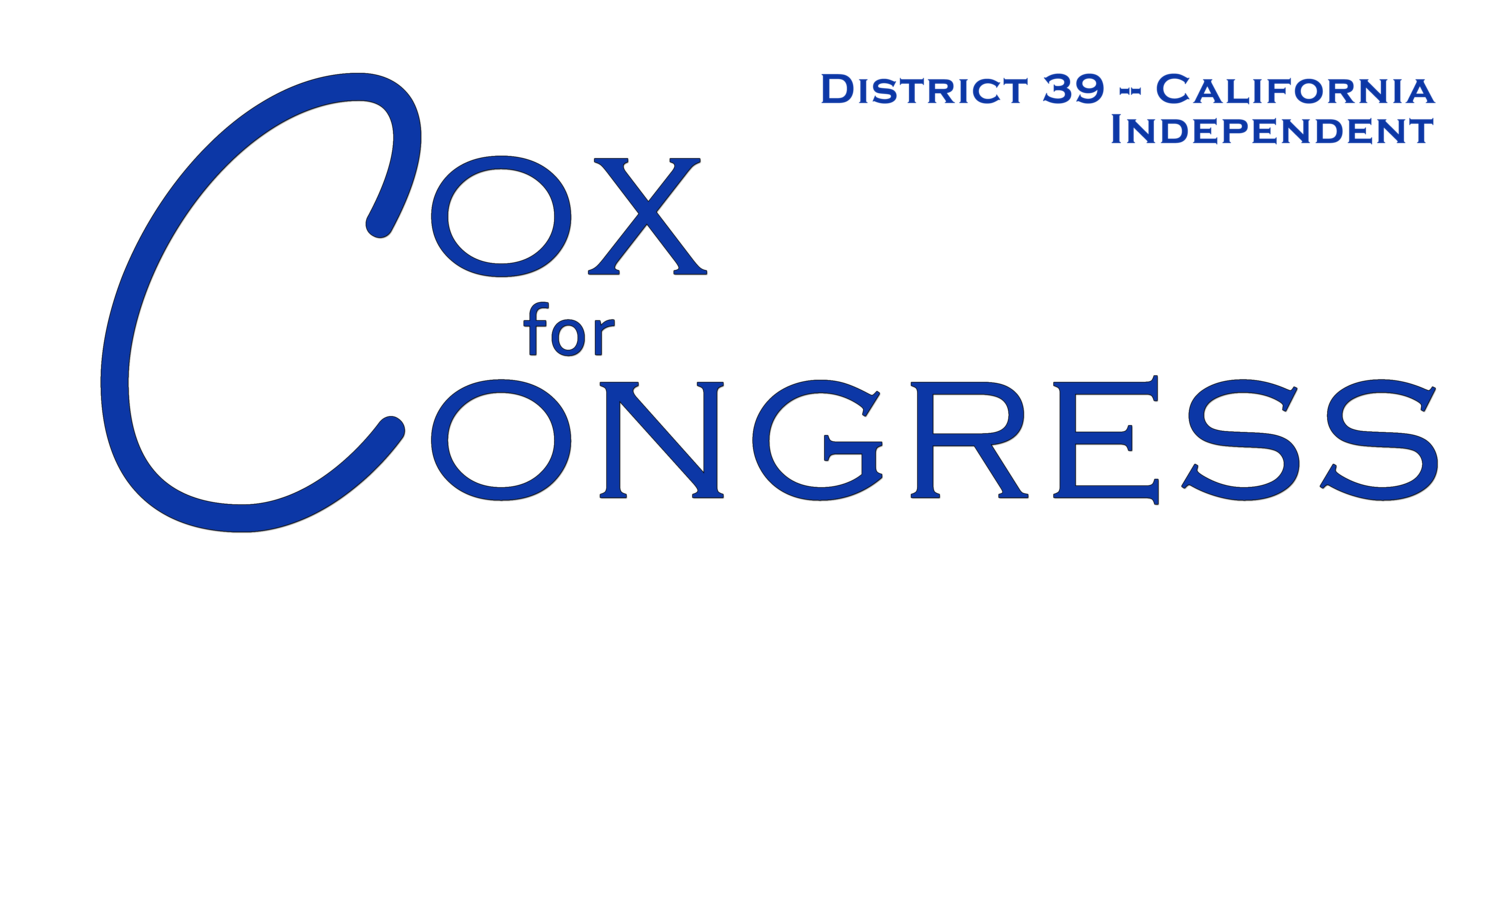 Cox for Congress